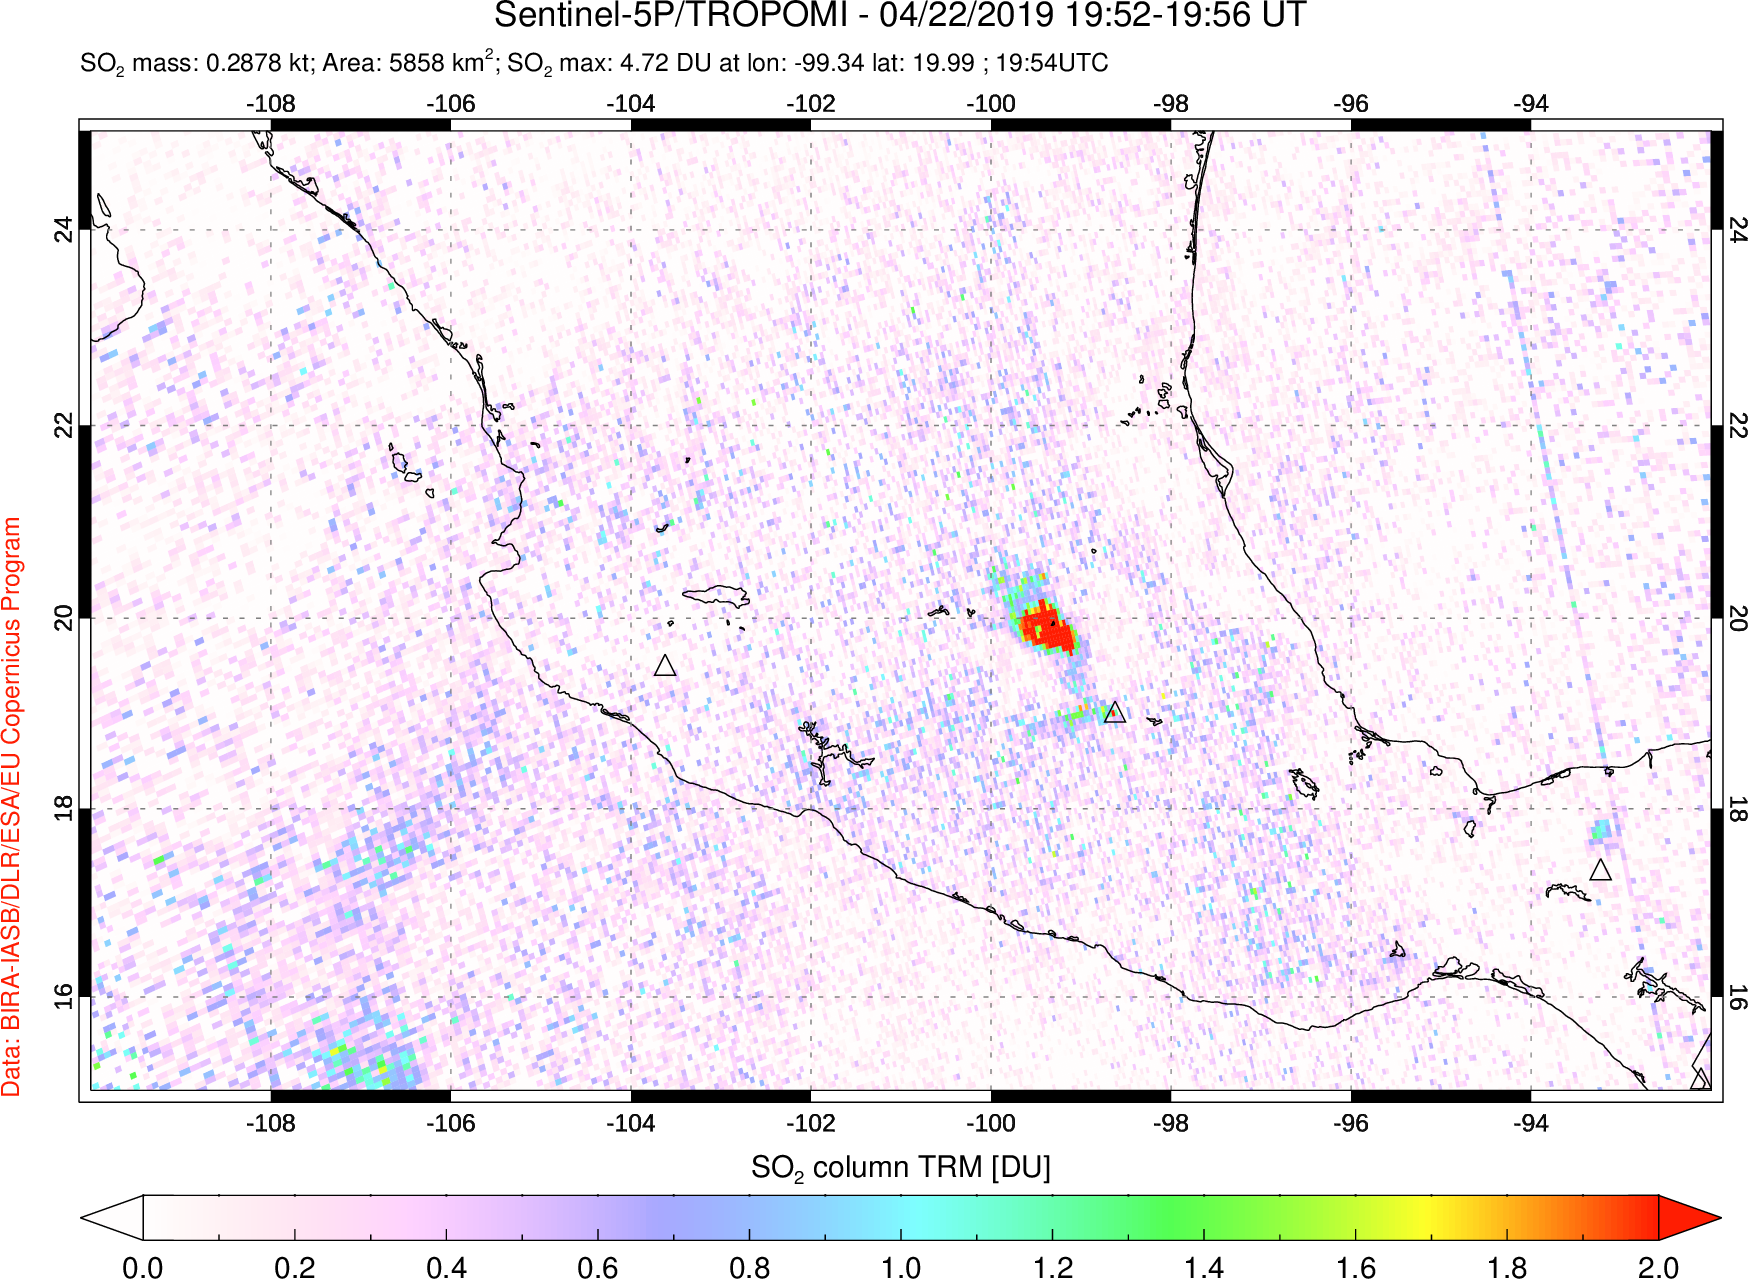 A sulfur dioxide image over Mexico on Apr 22, 2019.